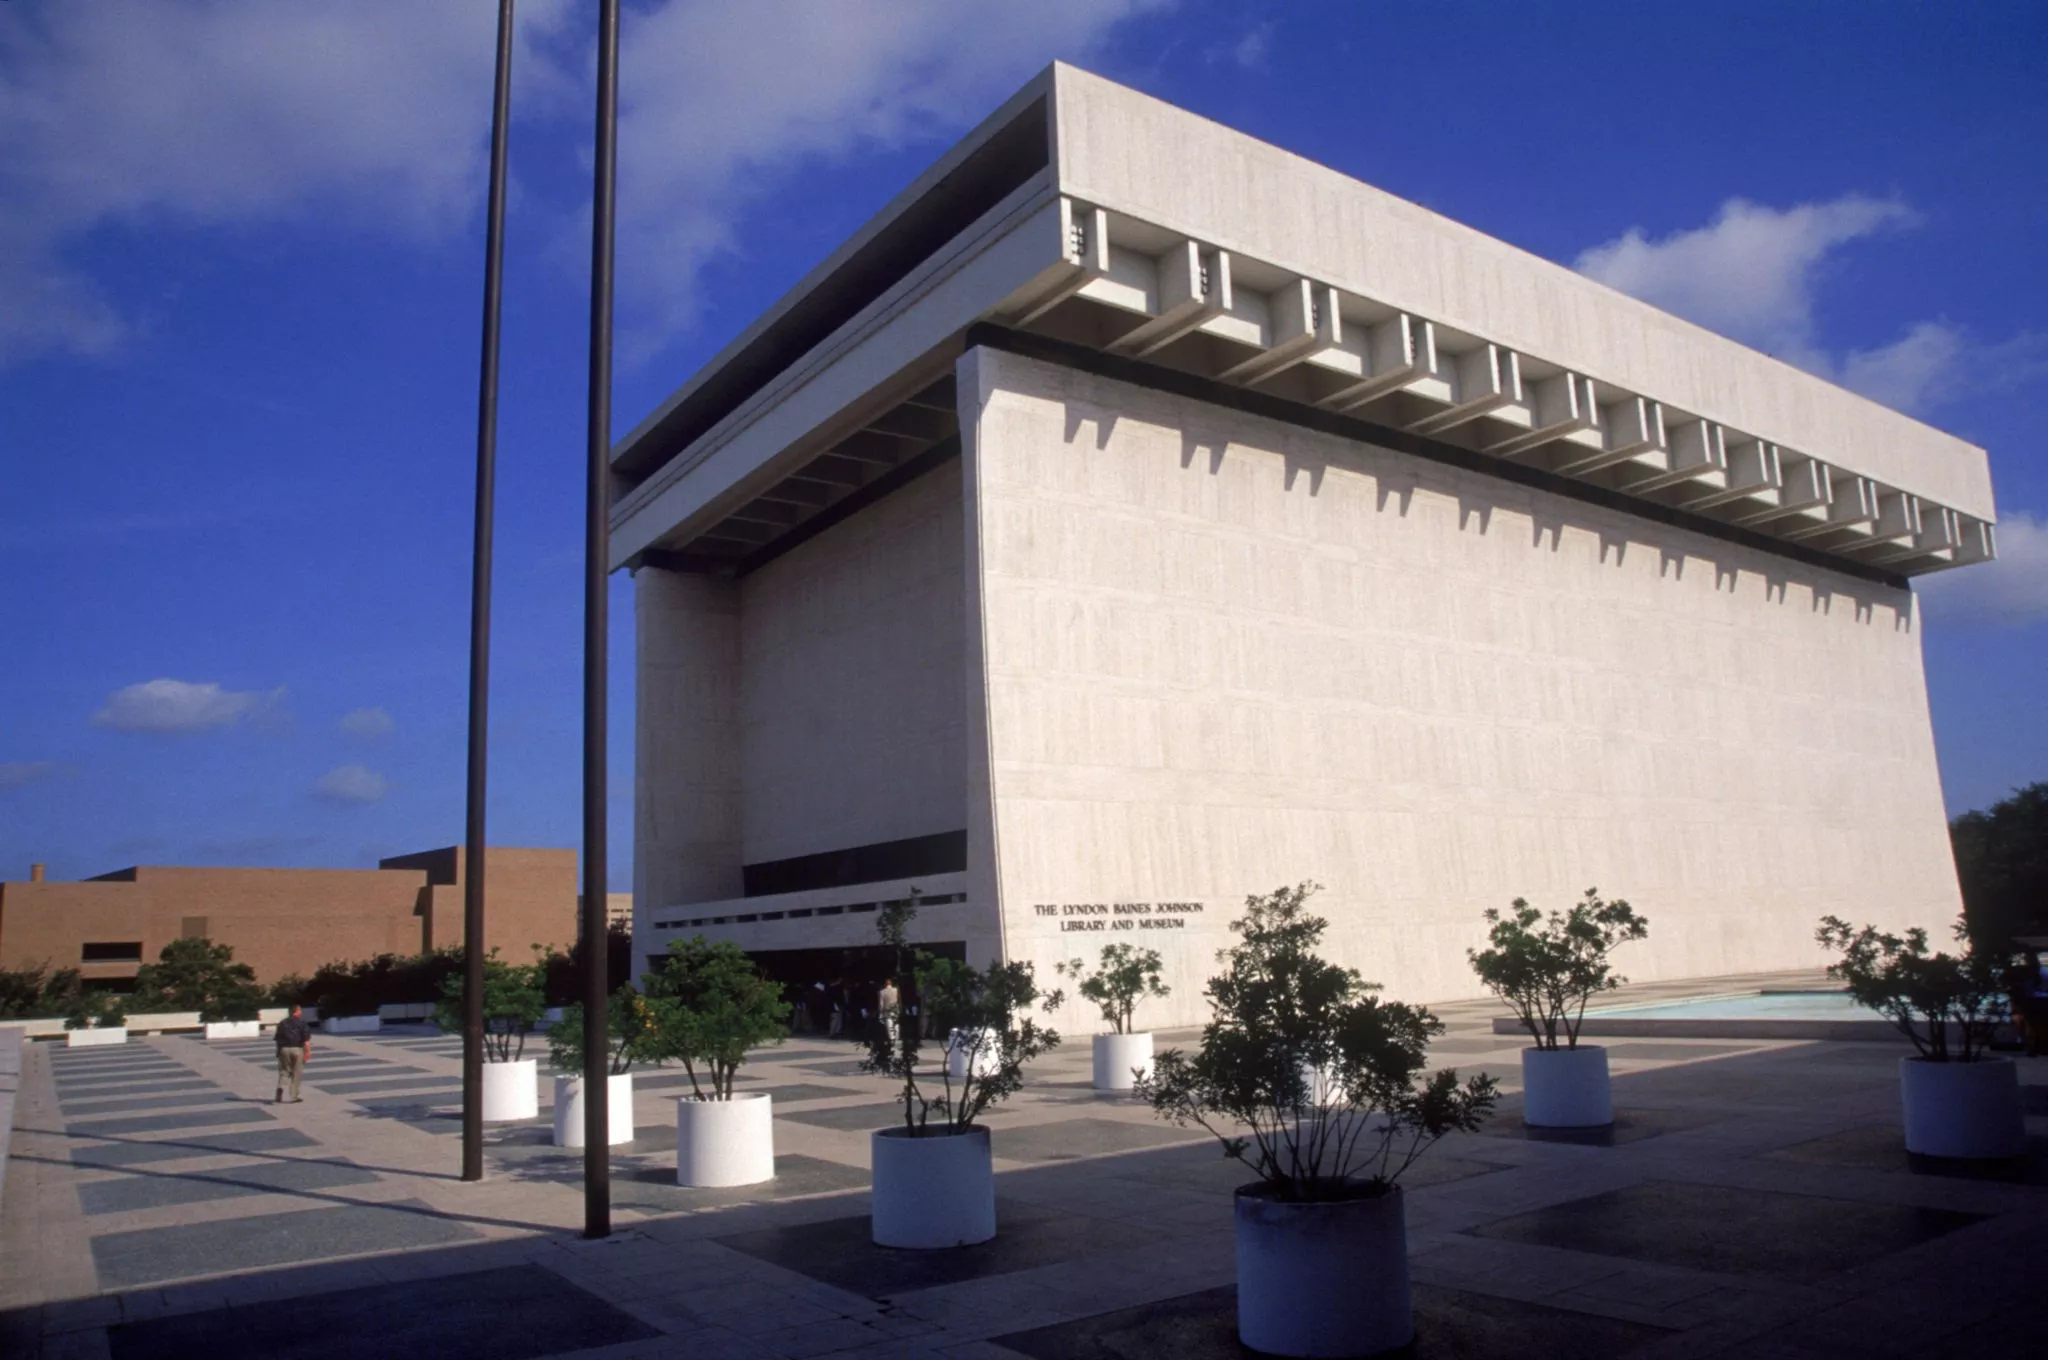 LBJ Presidential Library in USA, North America | Museums - Rated 3.7